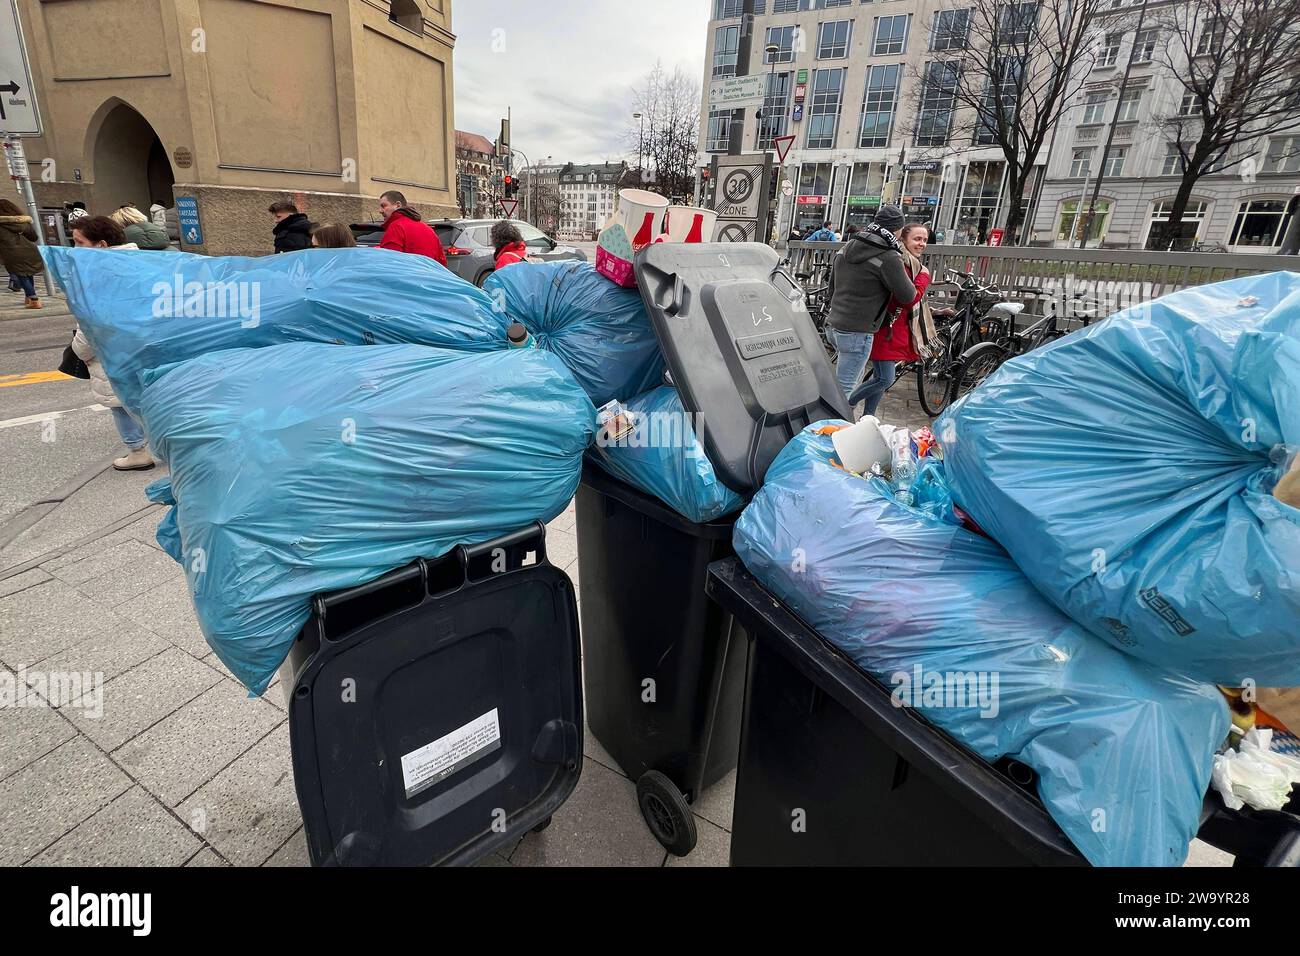 Volle und ueberfuellte Muelltonnen,Muellcontainer stehen im Tal in Muenchen am 31.12.2023. *** Full and overfilled garbage cans, garbage containers in the valley in Munich on 31 12 2023 Stock Photo